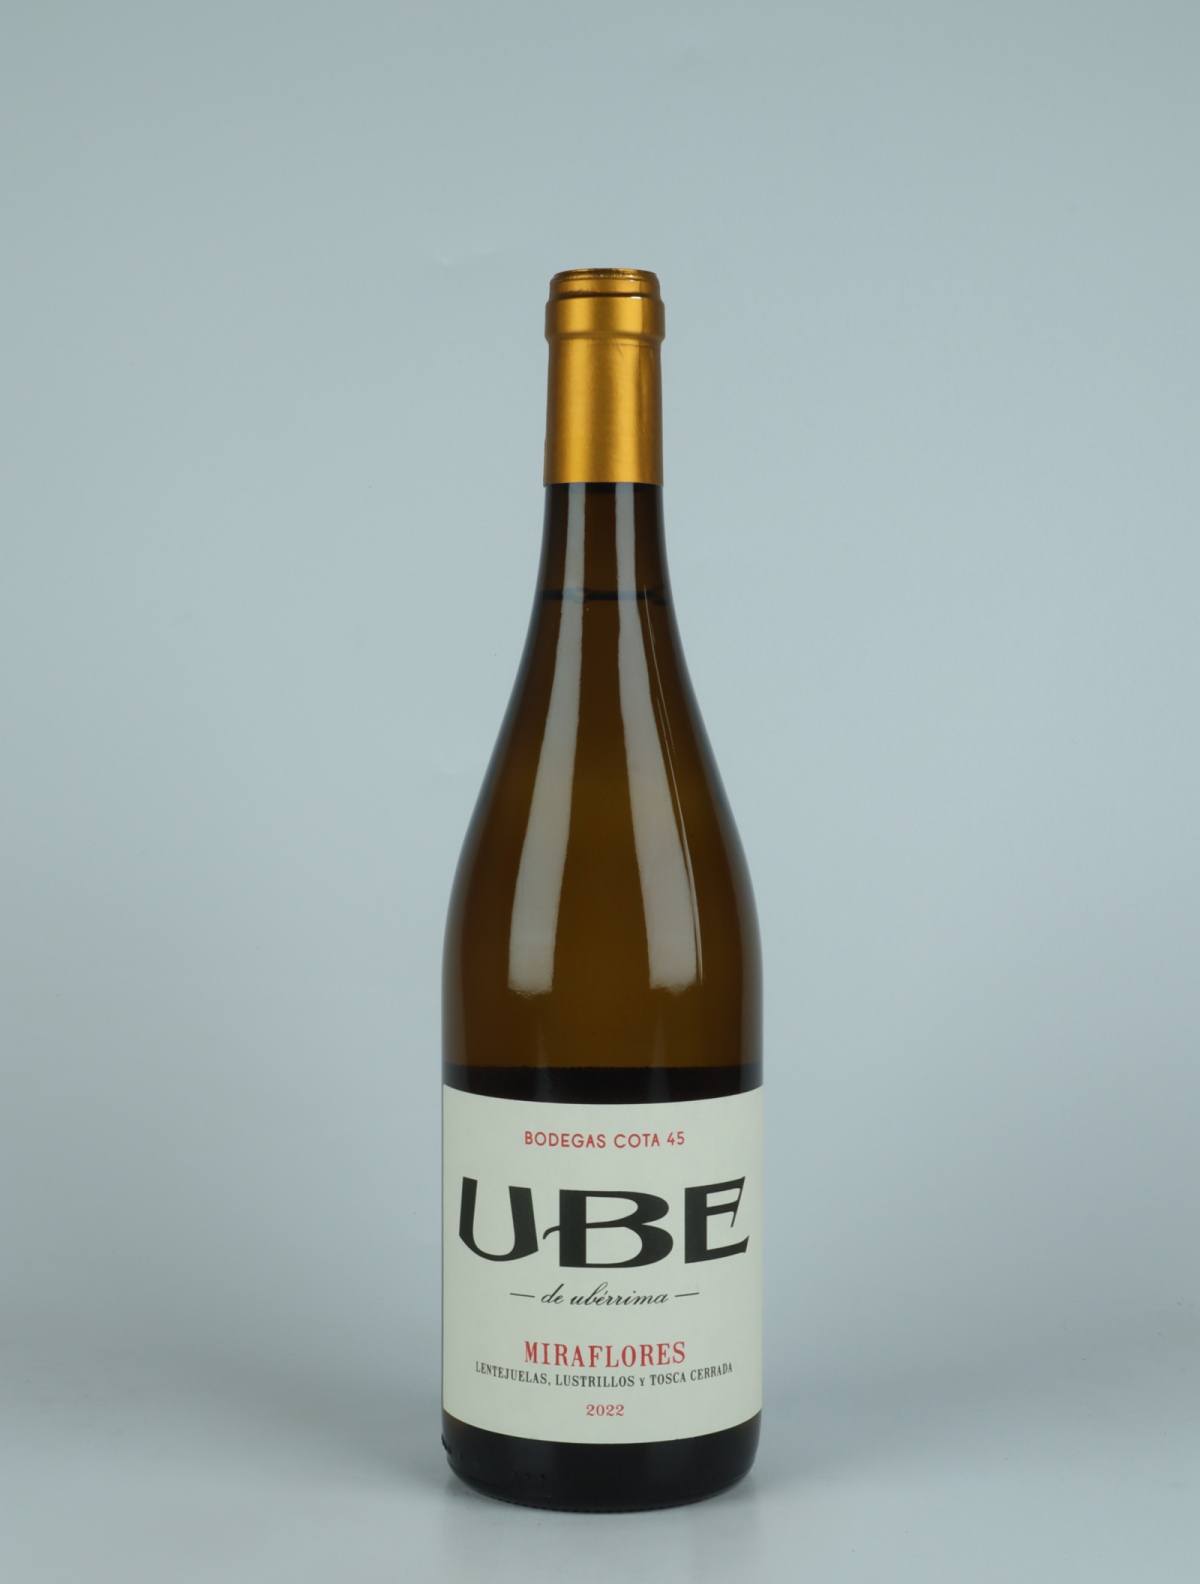 A bottle 2022 UBE Miraflores White wine from Bodegas Cota 45, Andalucia in Spain